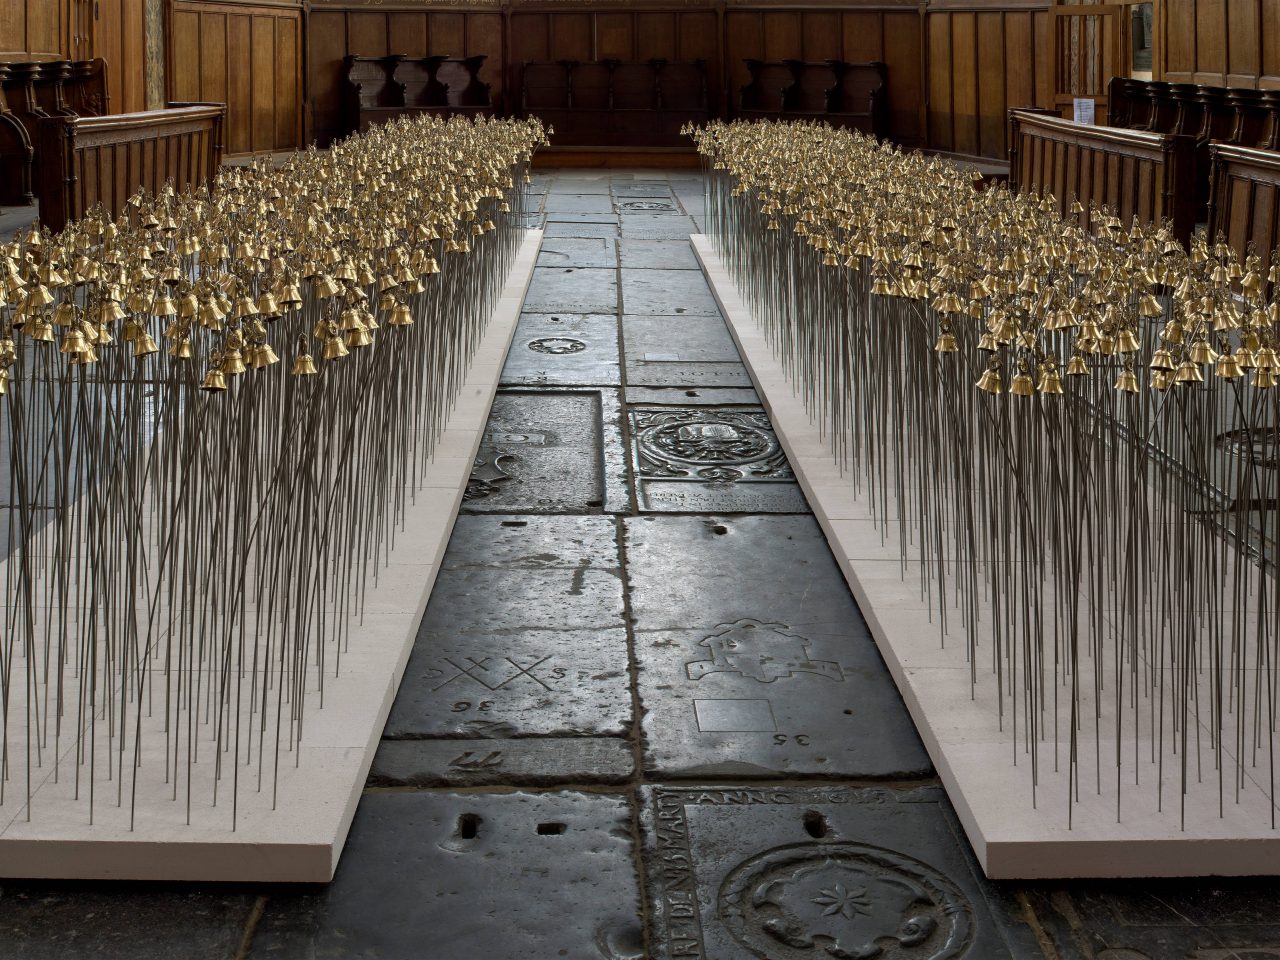 An installation of 2 long pathways of bells. It has a walkway in the middle so you can walk through it, this installation is inside a church⁠